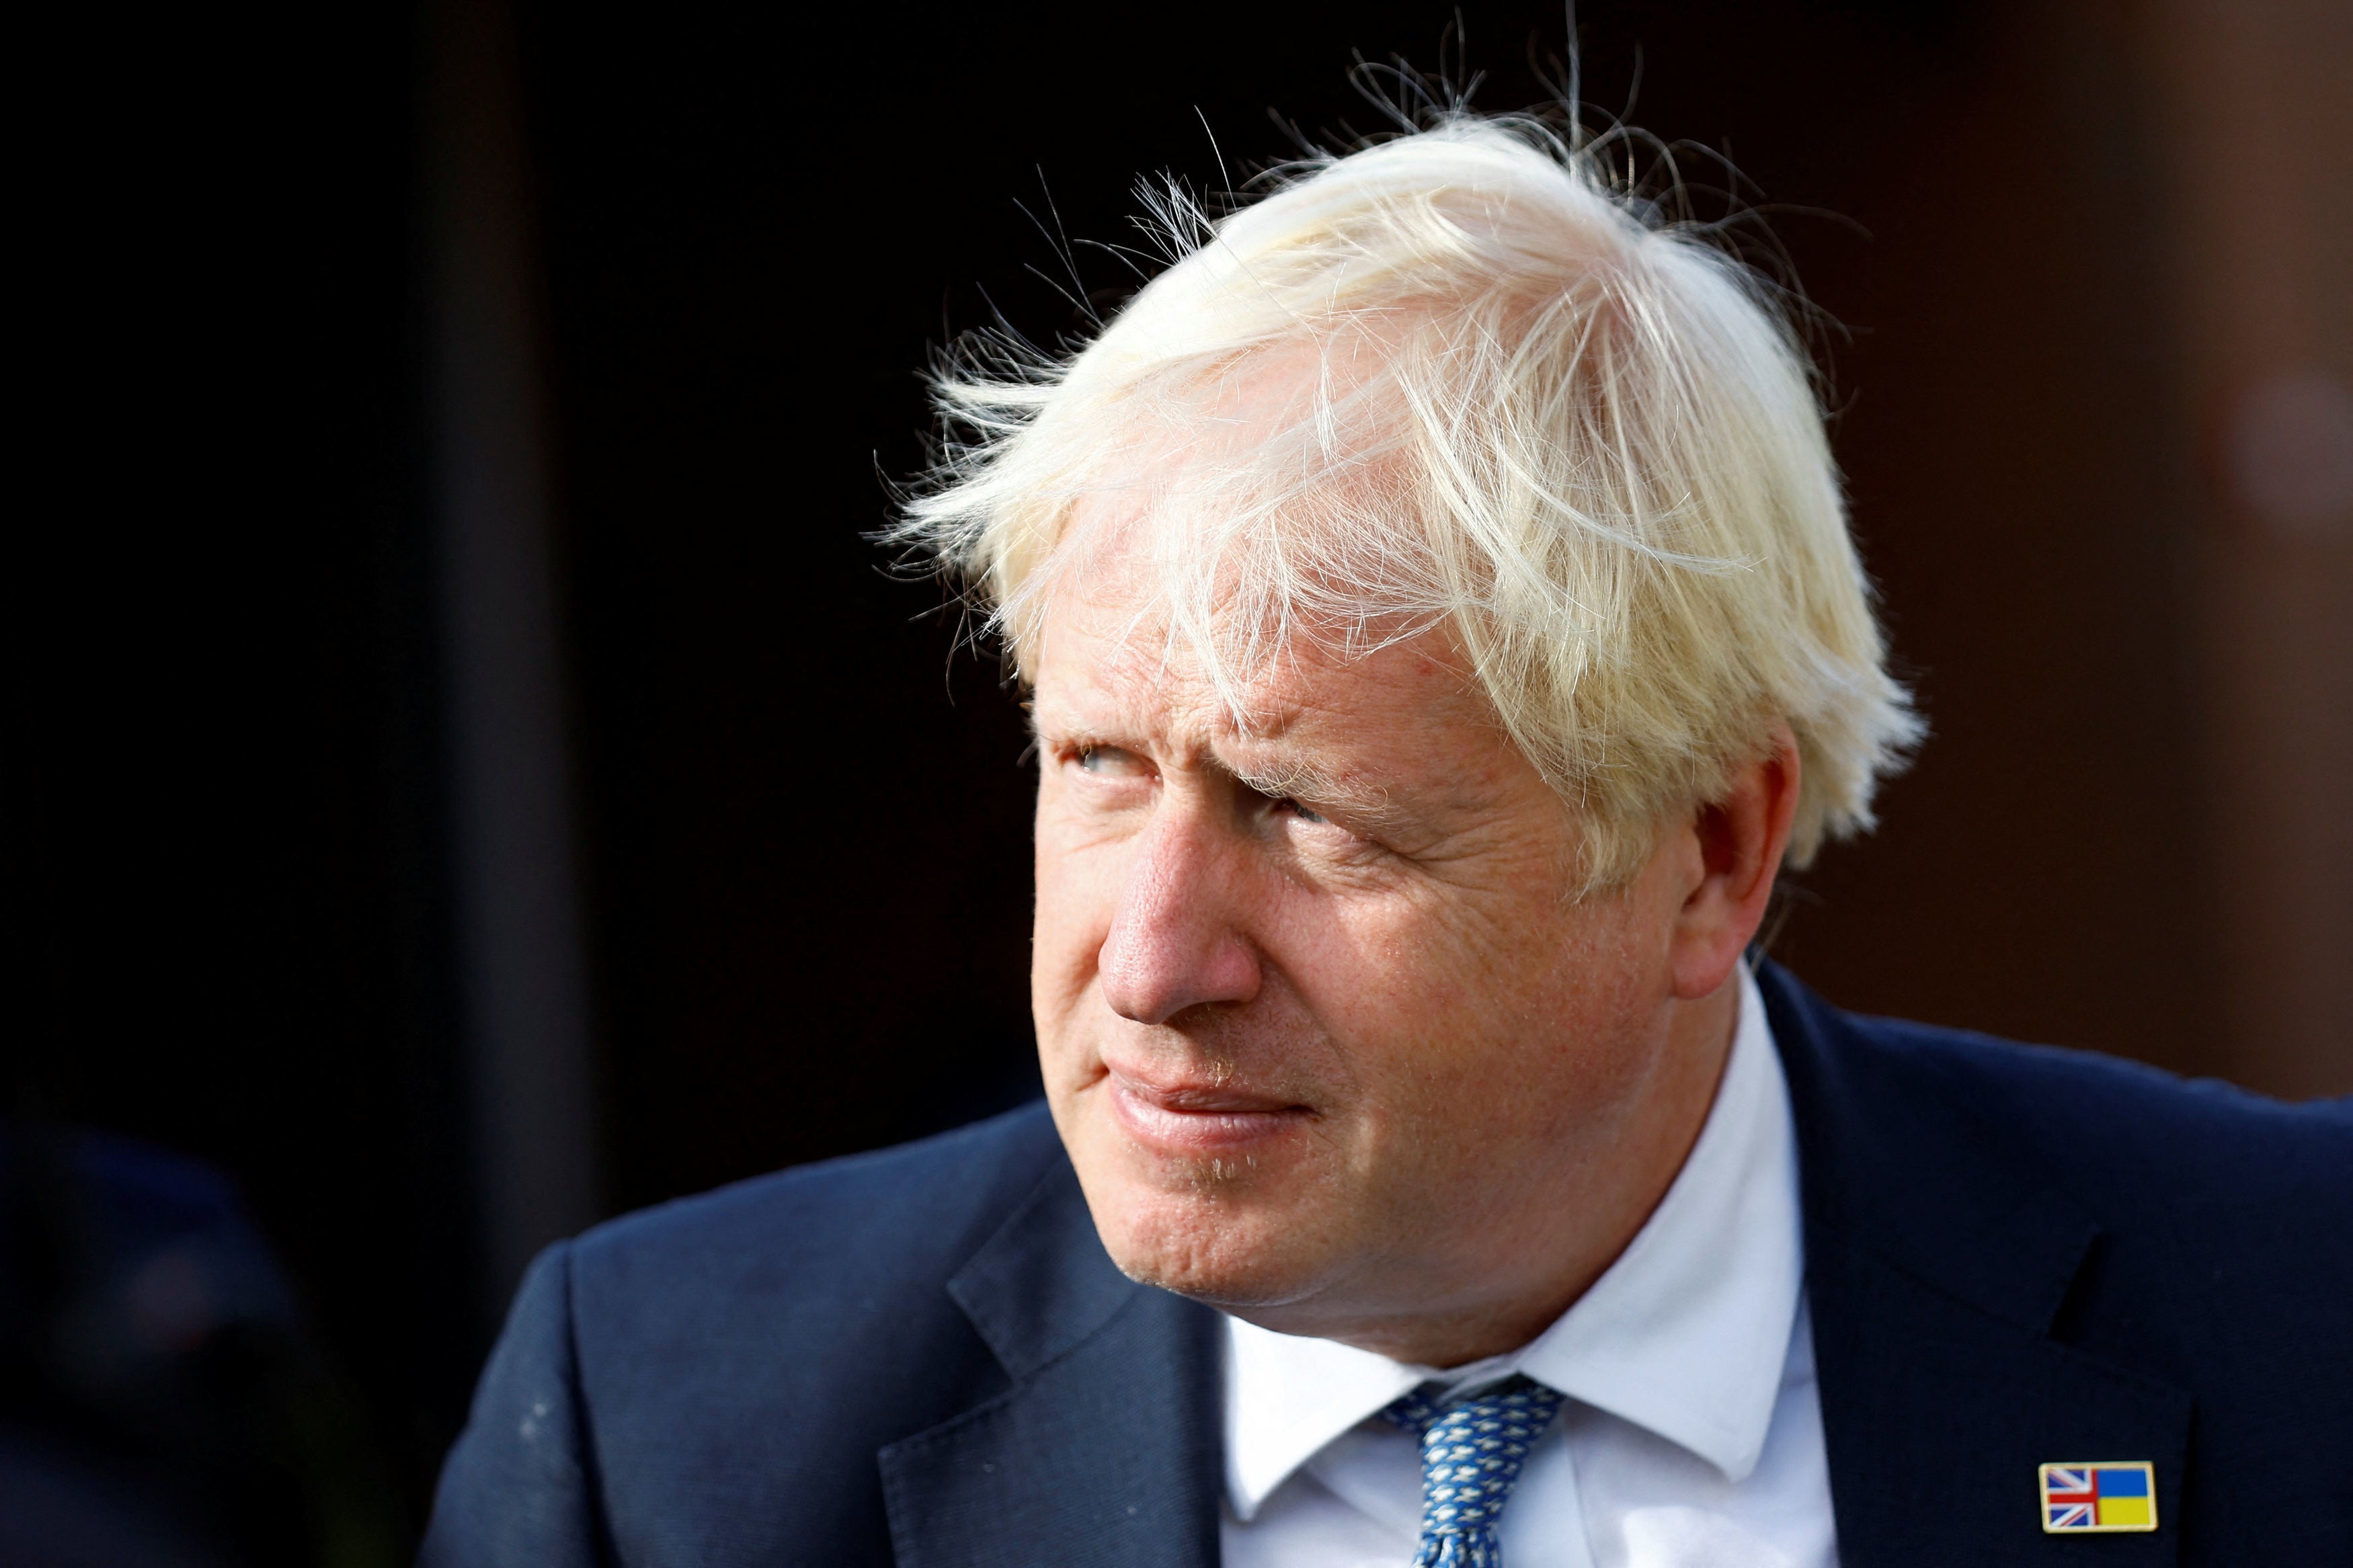 Boris’s return would only benefit the Labour Party